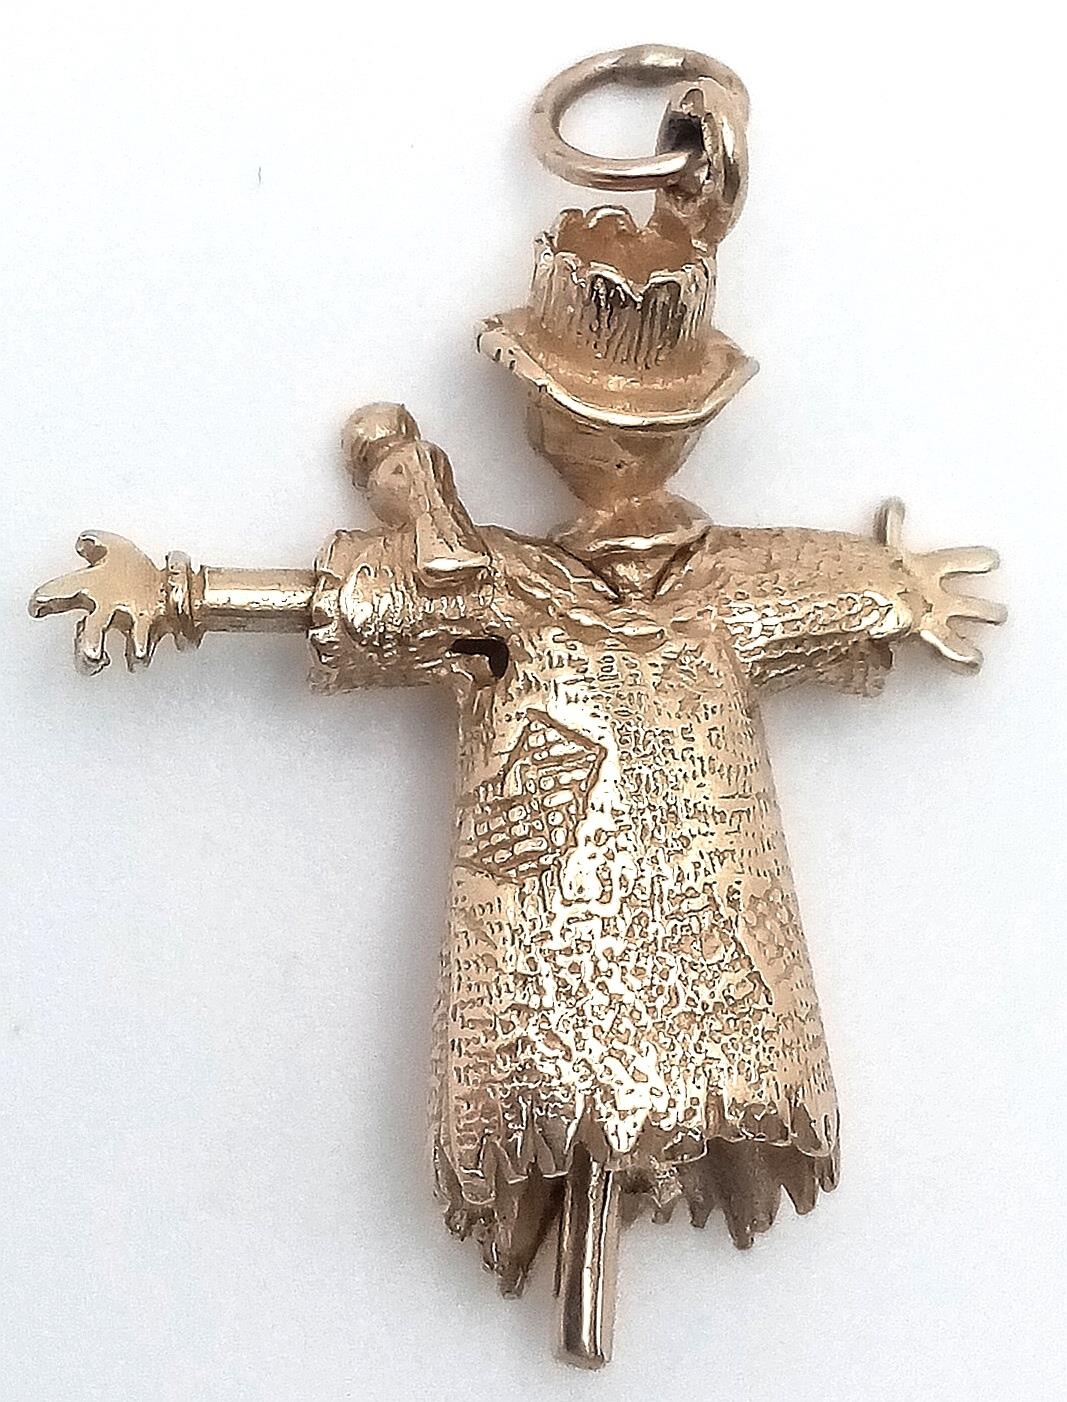 A 9K YELLOW GOLD SCARECROW CHARM WITH MOVING PARTS. 28mm length, 3.2g weight. Ref: SC 9056 - Image 2 of 3